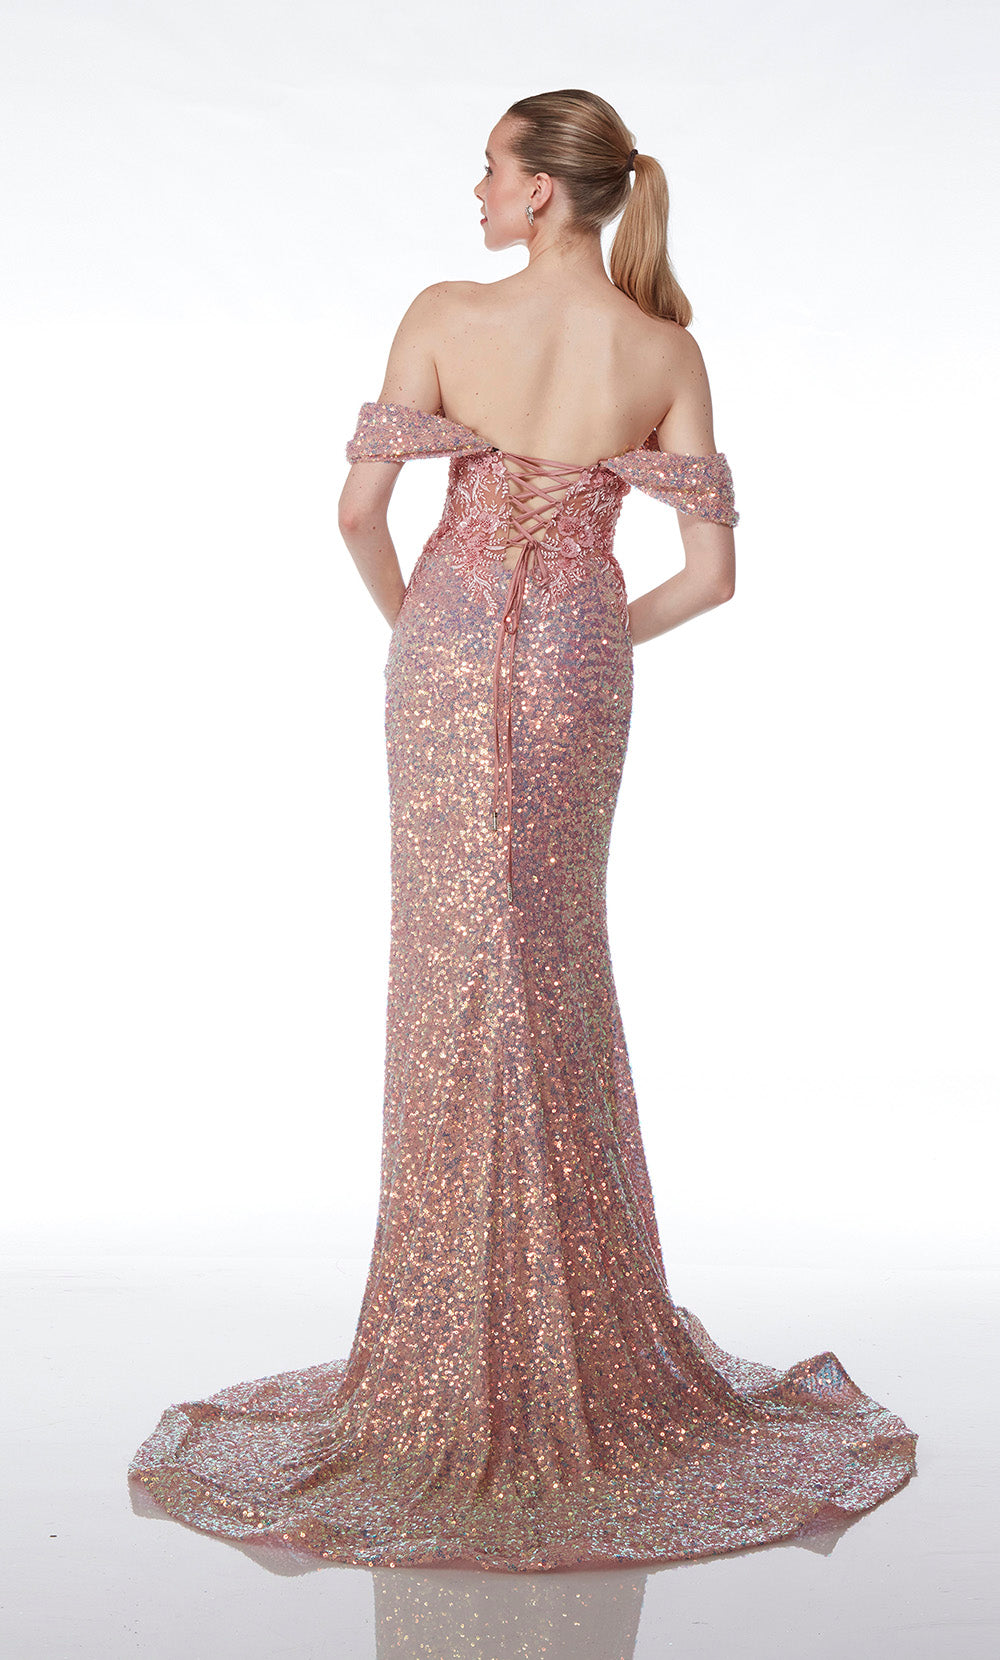 Pink-opal sequin off-the-shoulder corset dress with an sheer lace top, high side slit, lace-up back, and an long train for an captivating and elegant look.